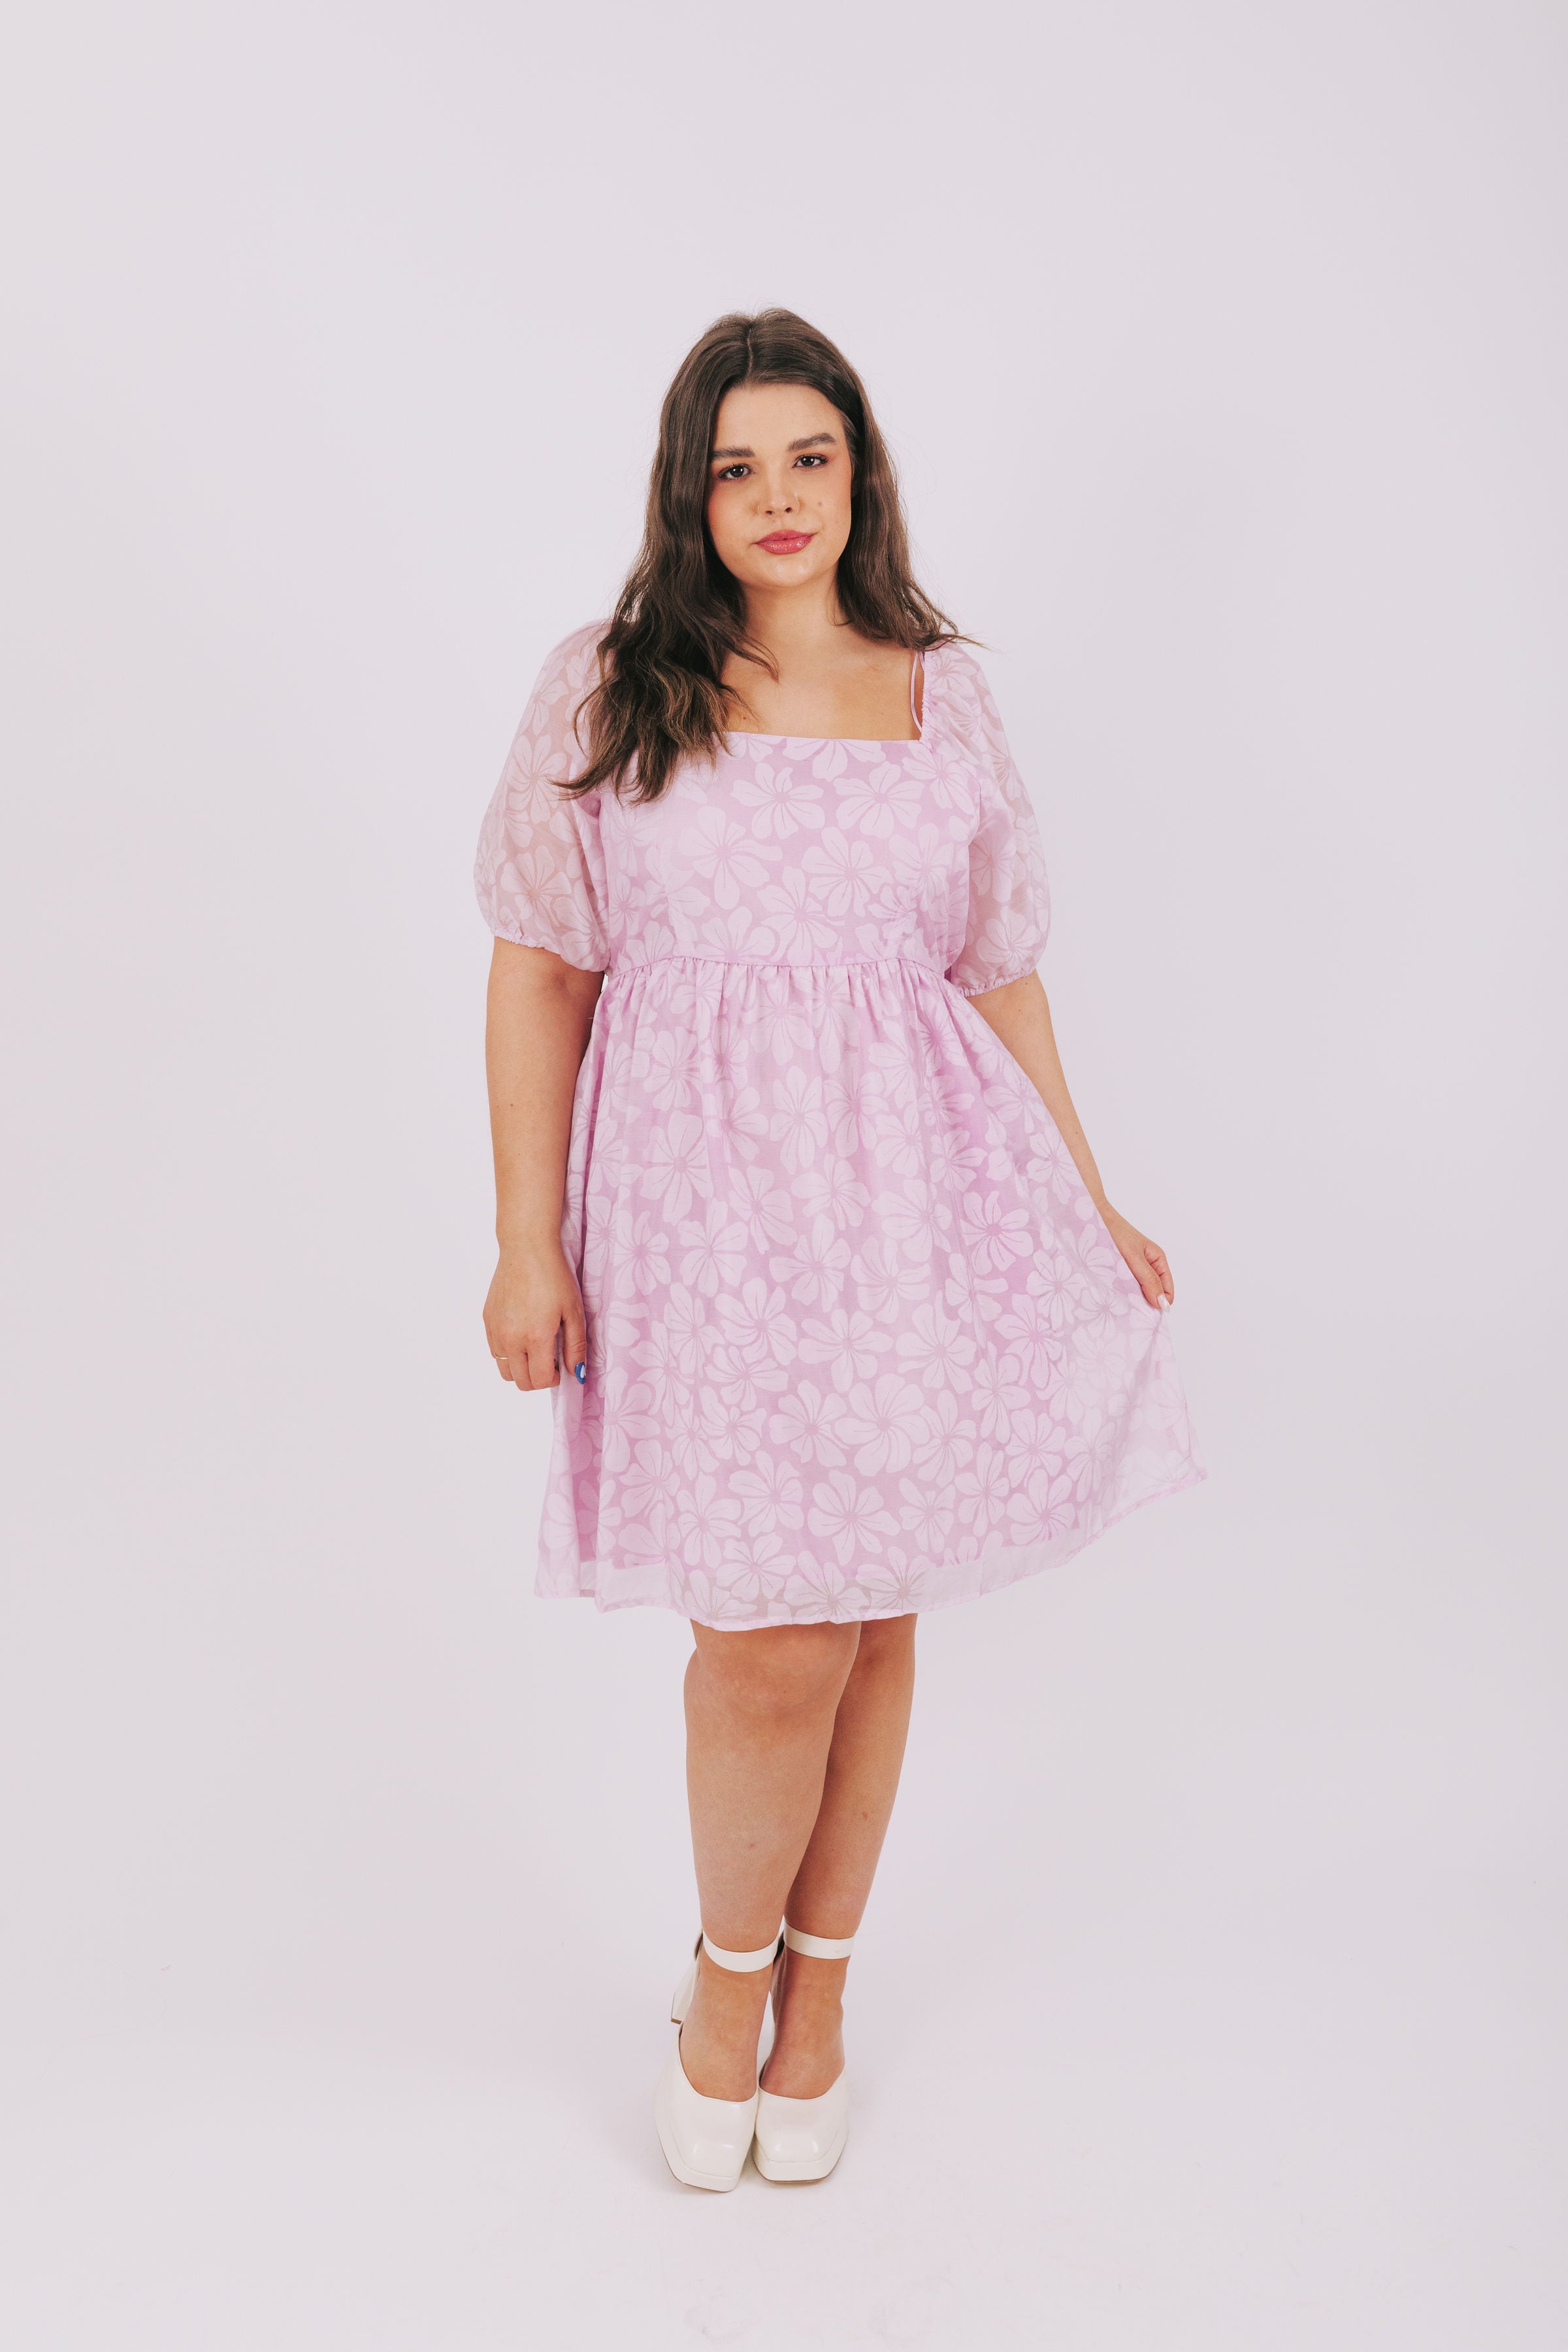 PLUS SIZE - Give Your All Dress